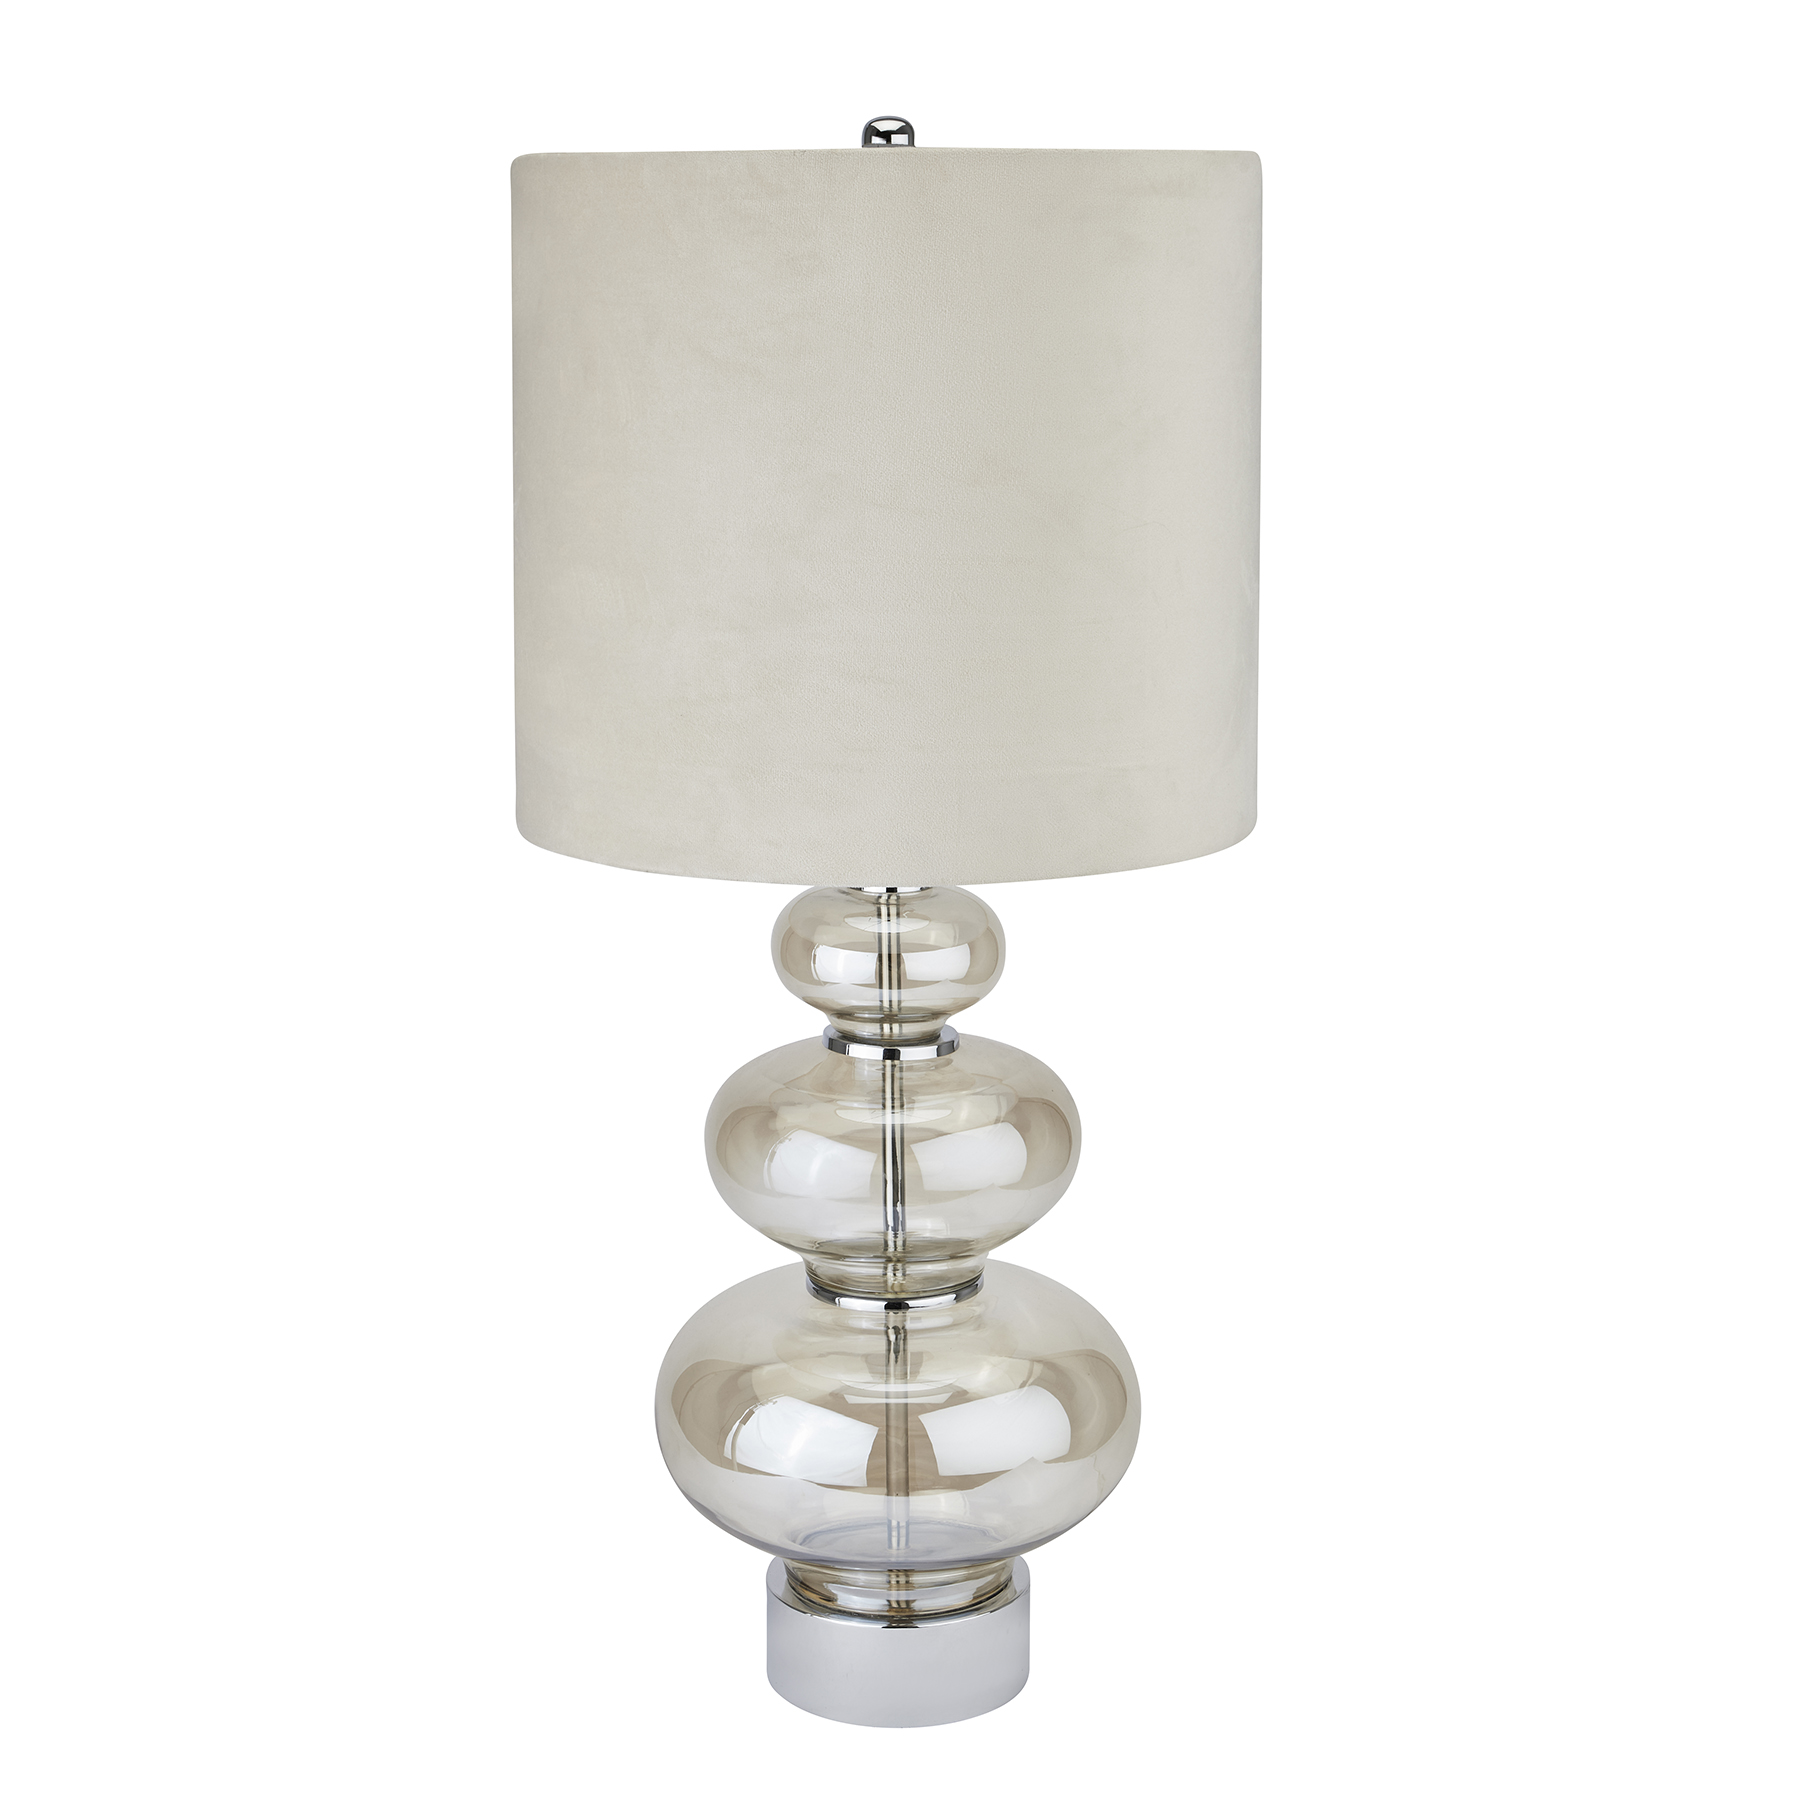 Justicia Metallic Glass Lamp With Velvet Shade - Image 1